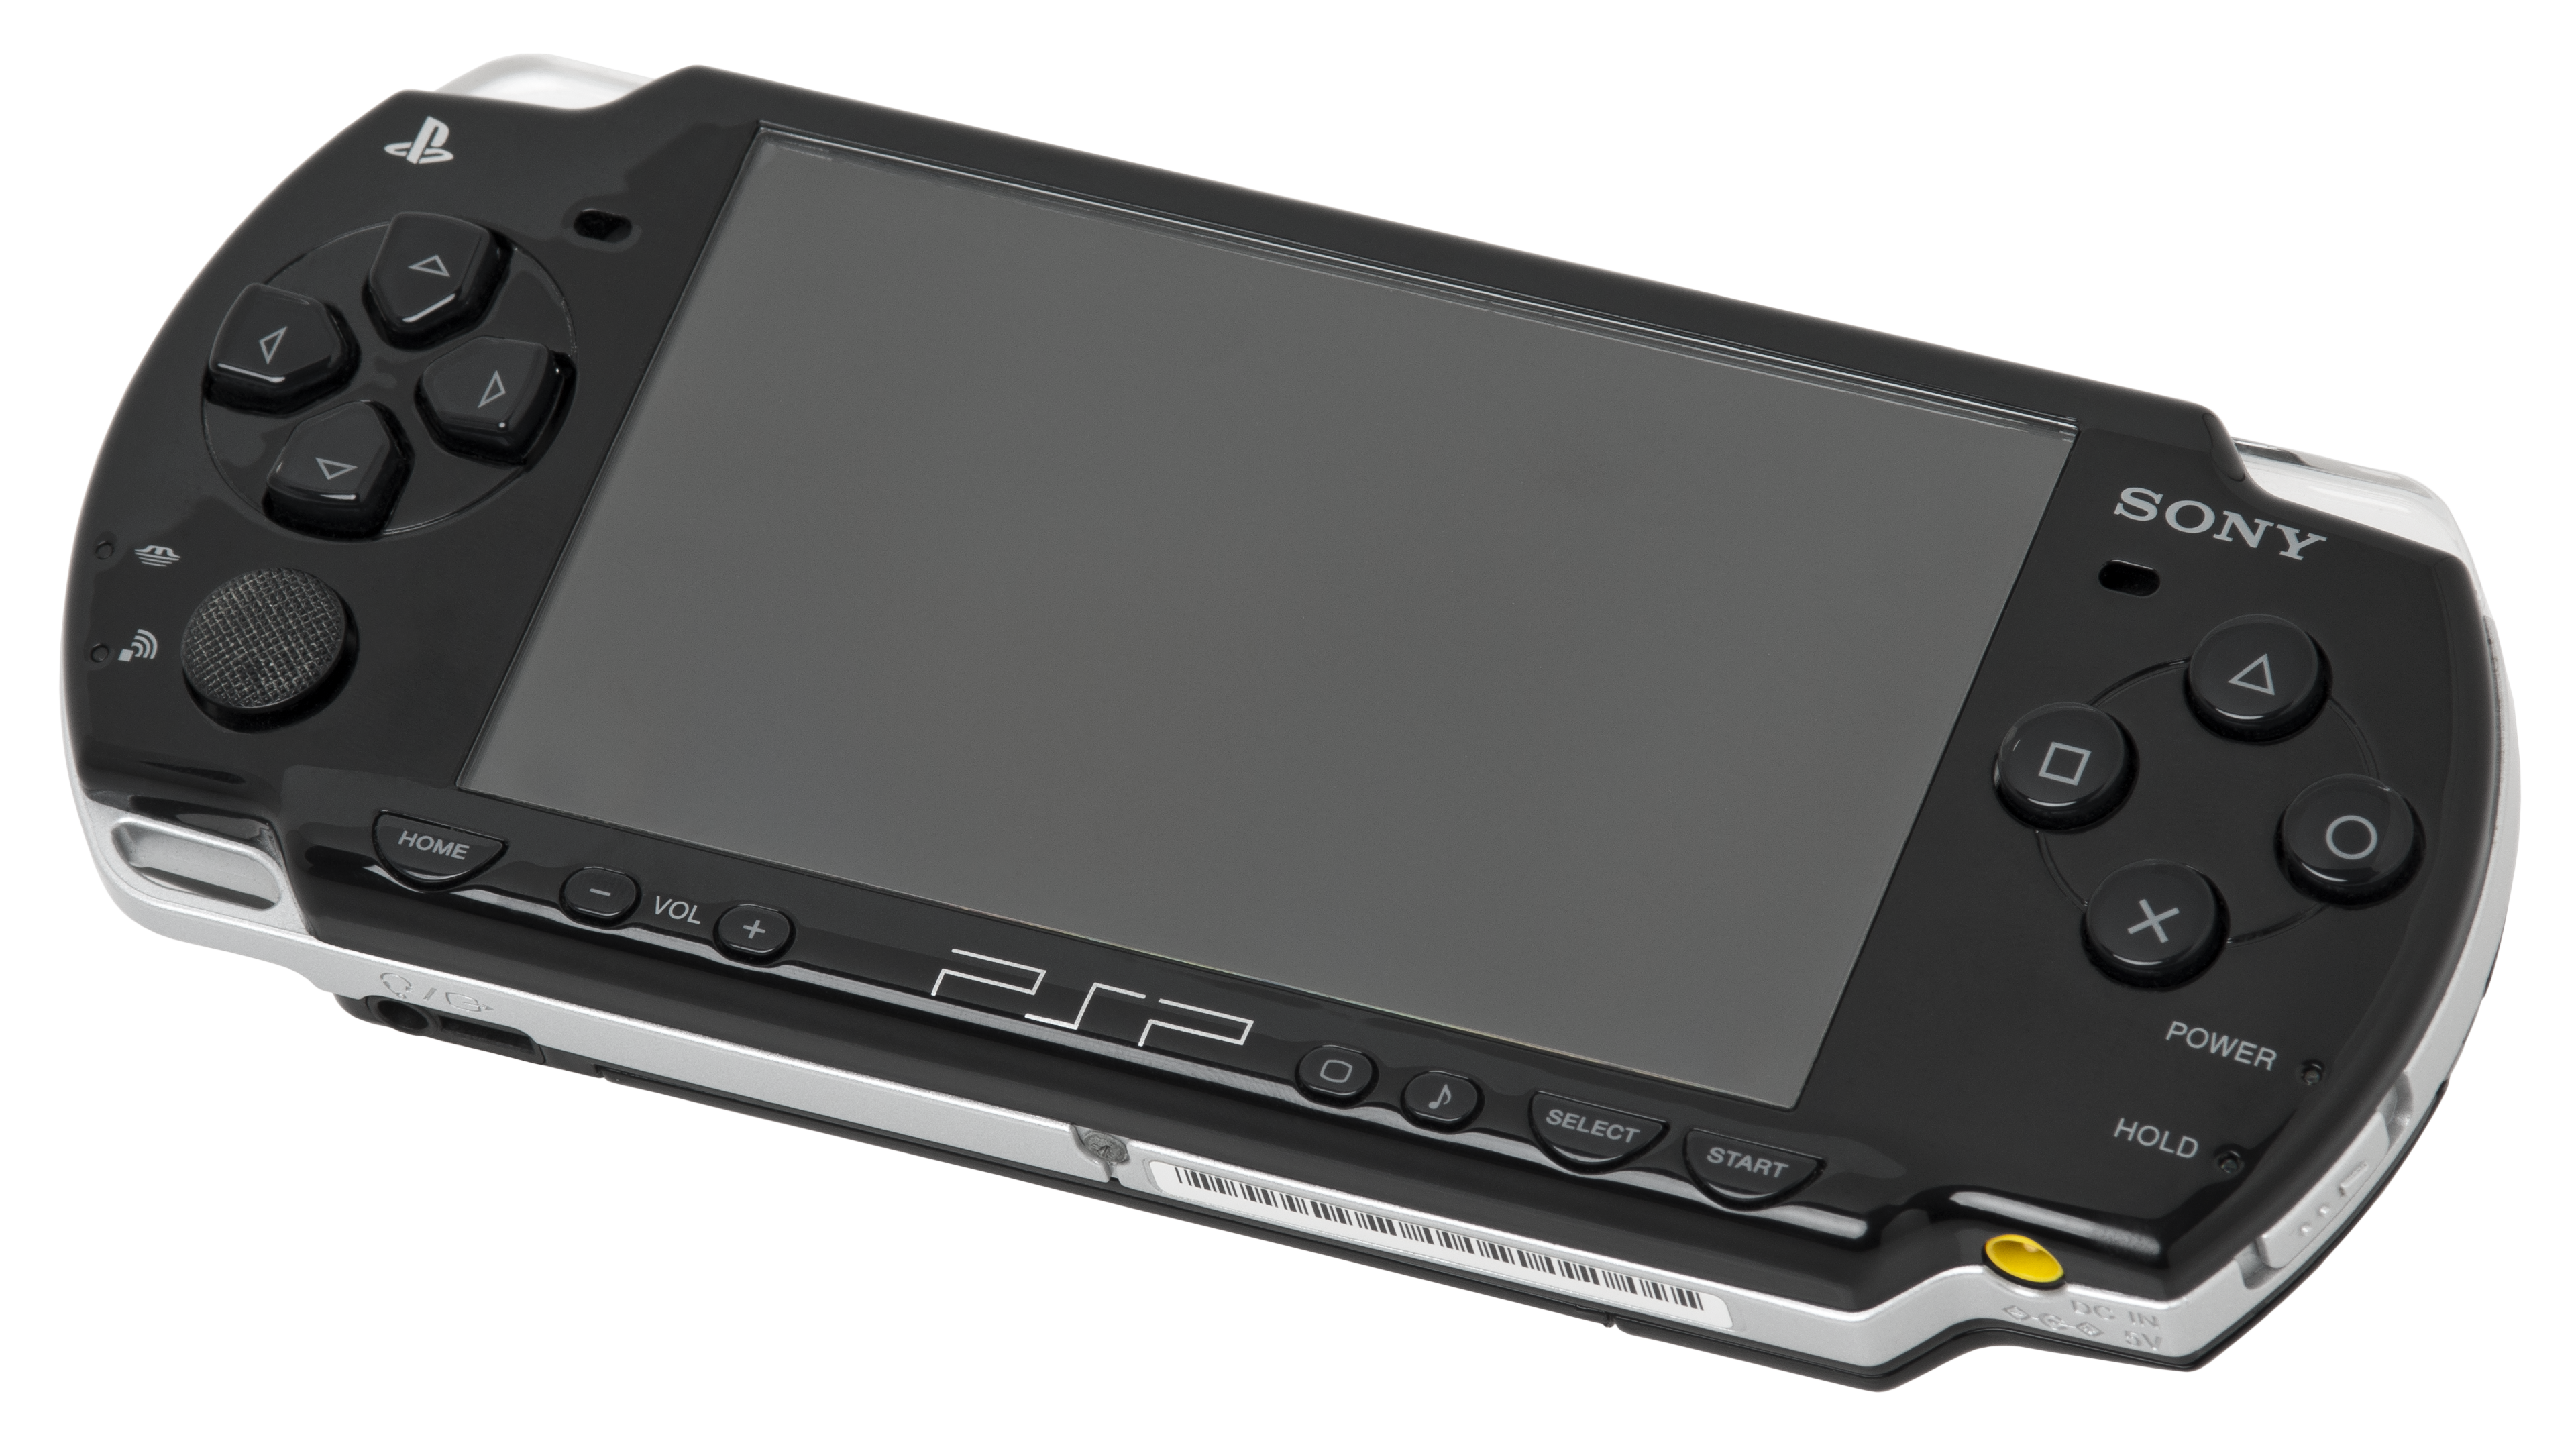 File:PSP-2000-trans.png - Wikimedia Commons